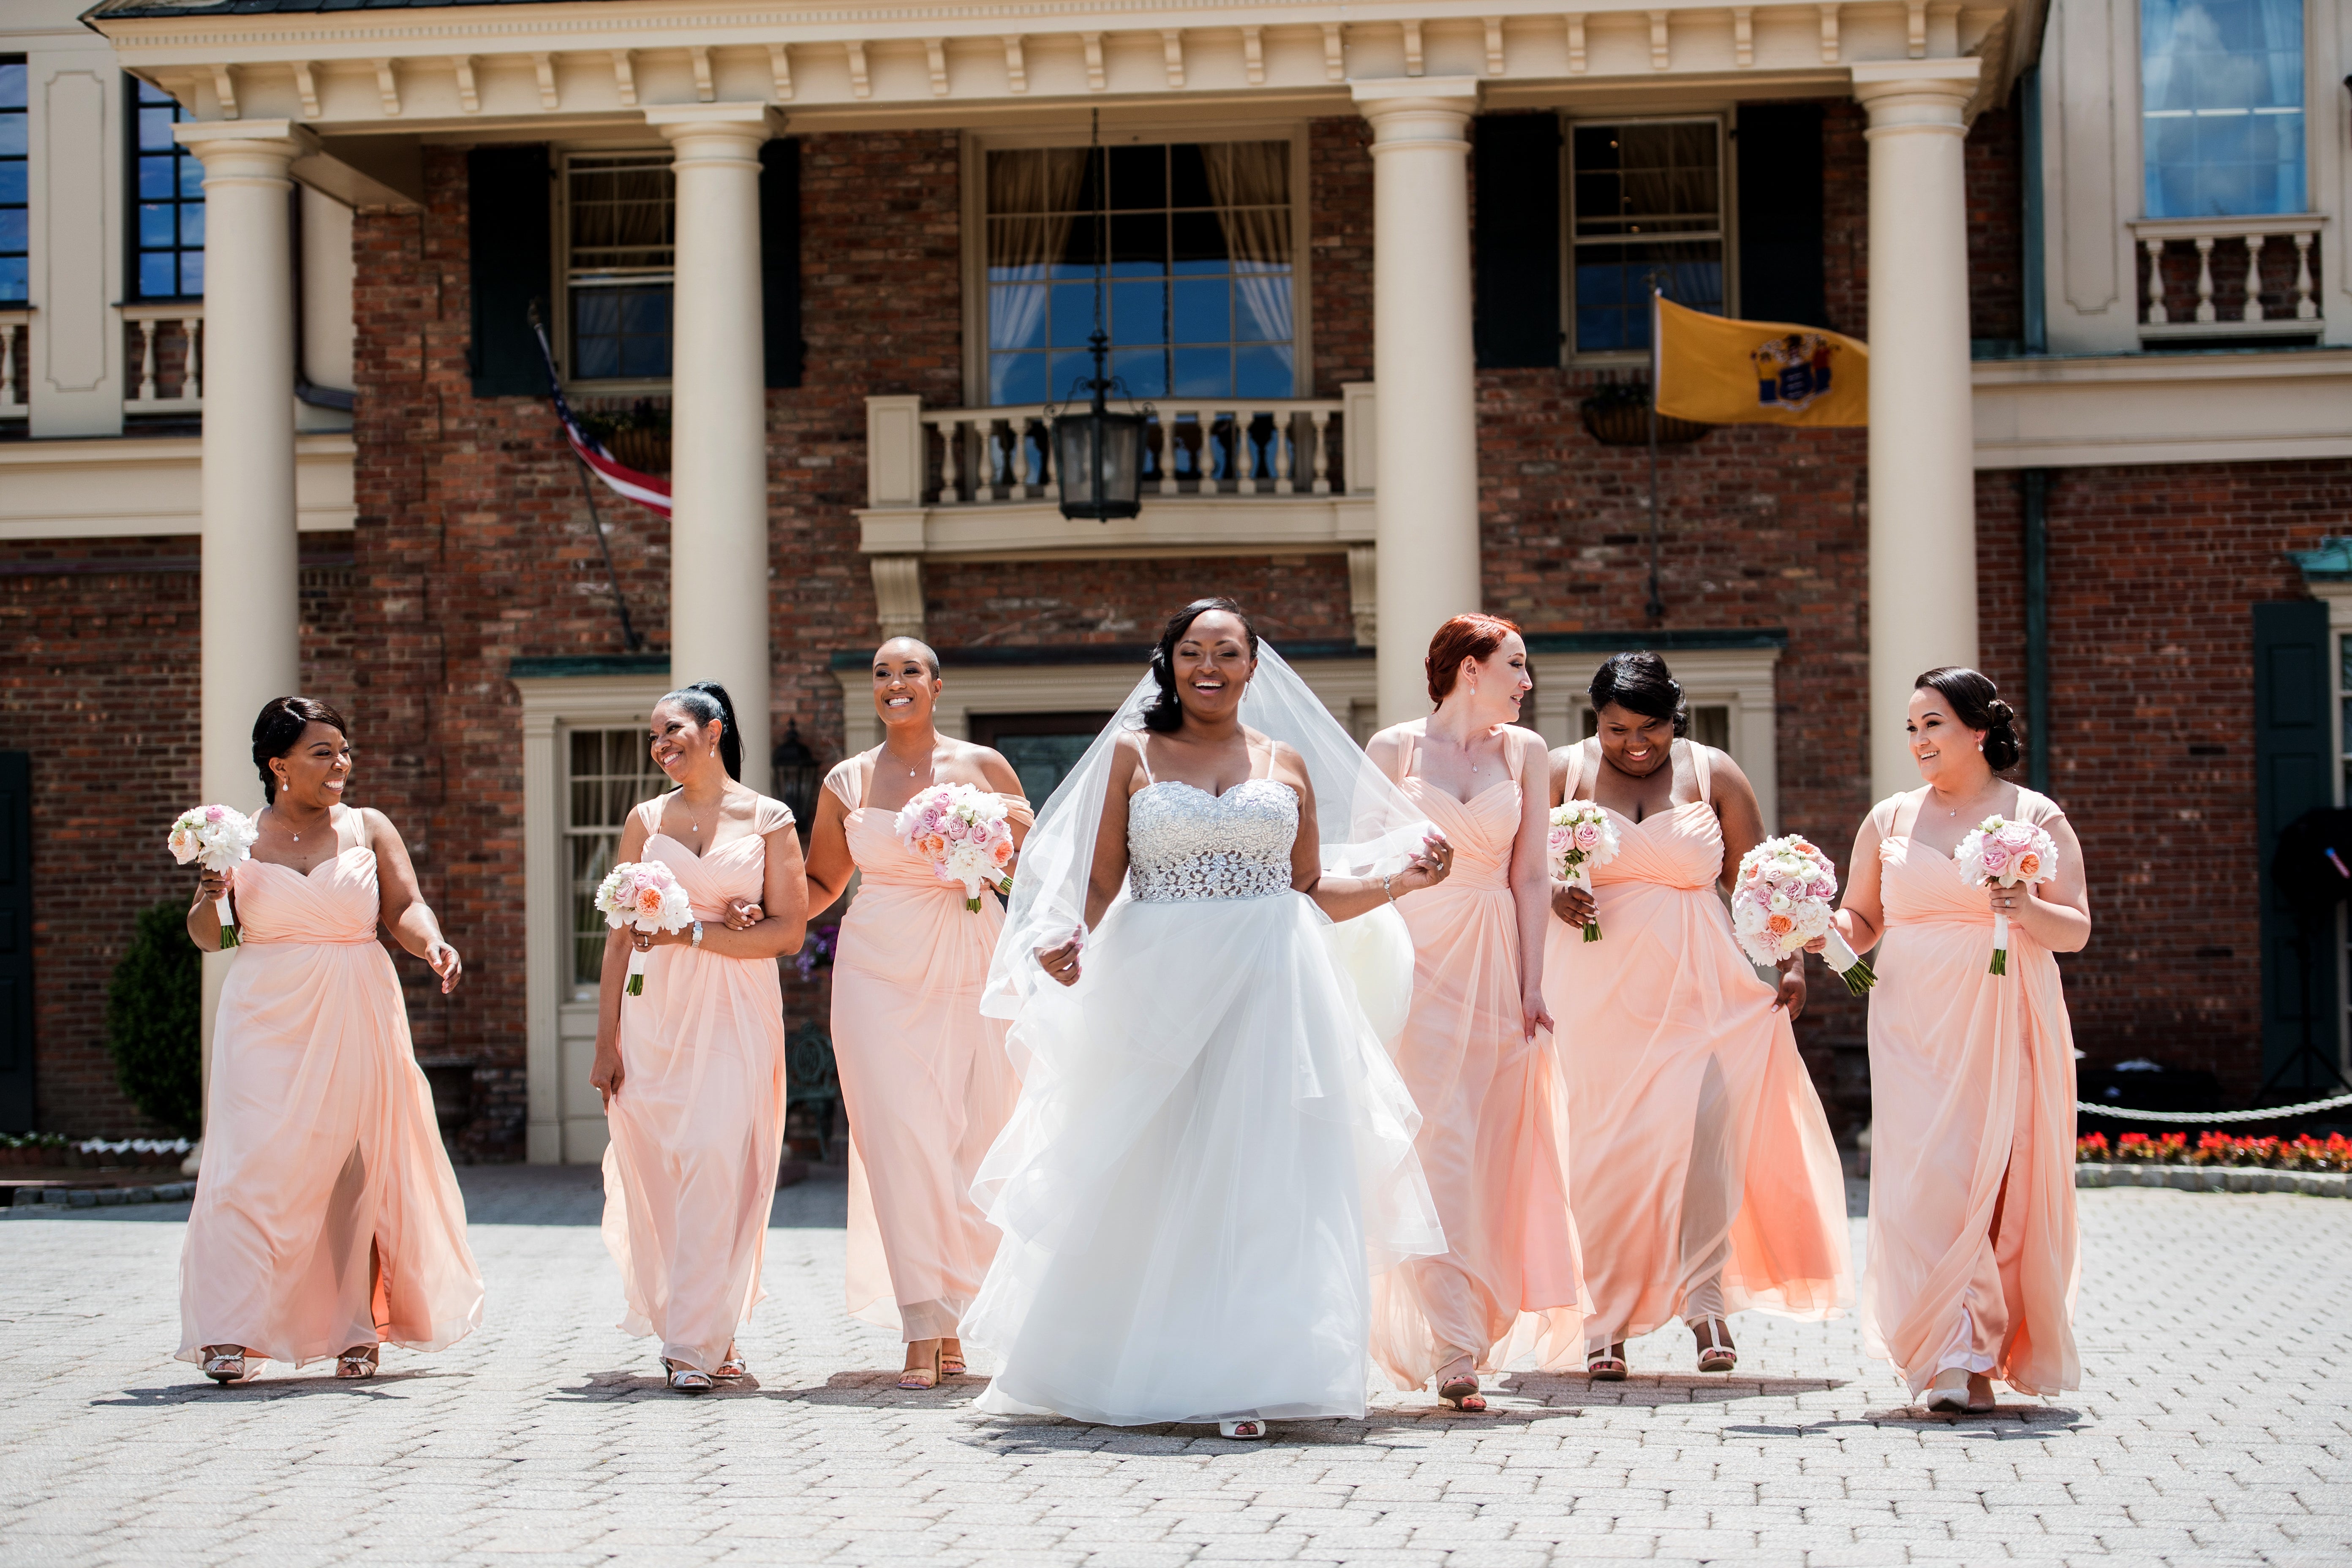 Bridal Bliss: See Guillermo And Jolie's Gorgeous Garden Wedding With New Orleans Flair
